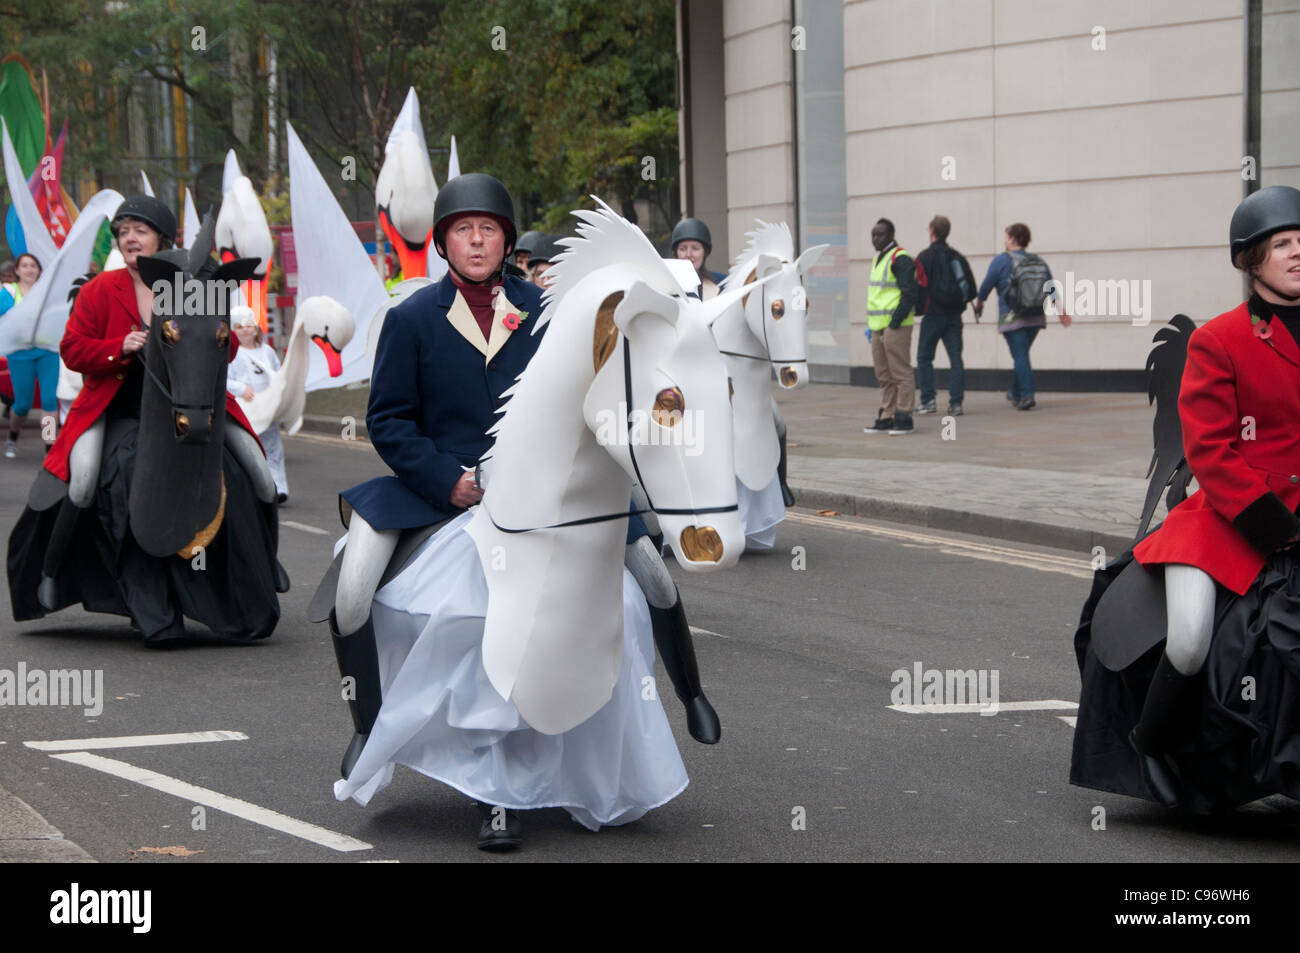 Lord Mayor's show. City solicitors present Animal Olympics as part of the procession. Stock Photo